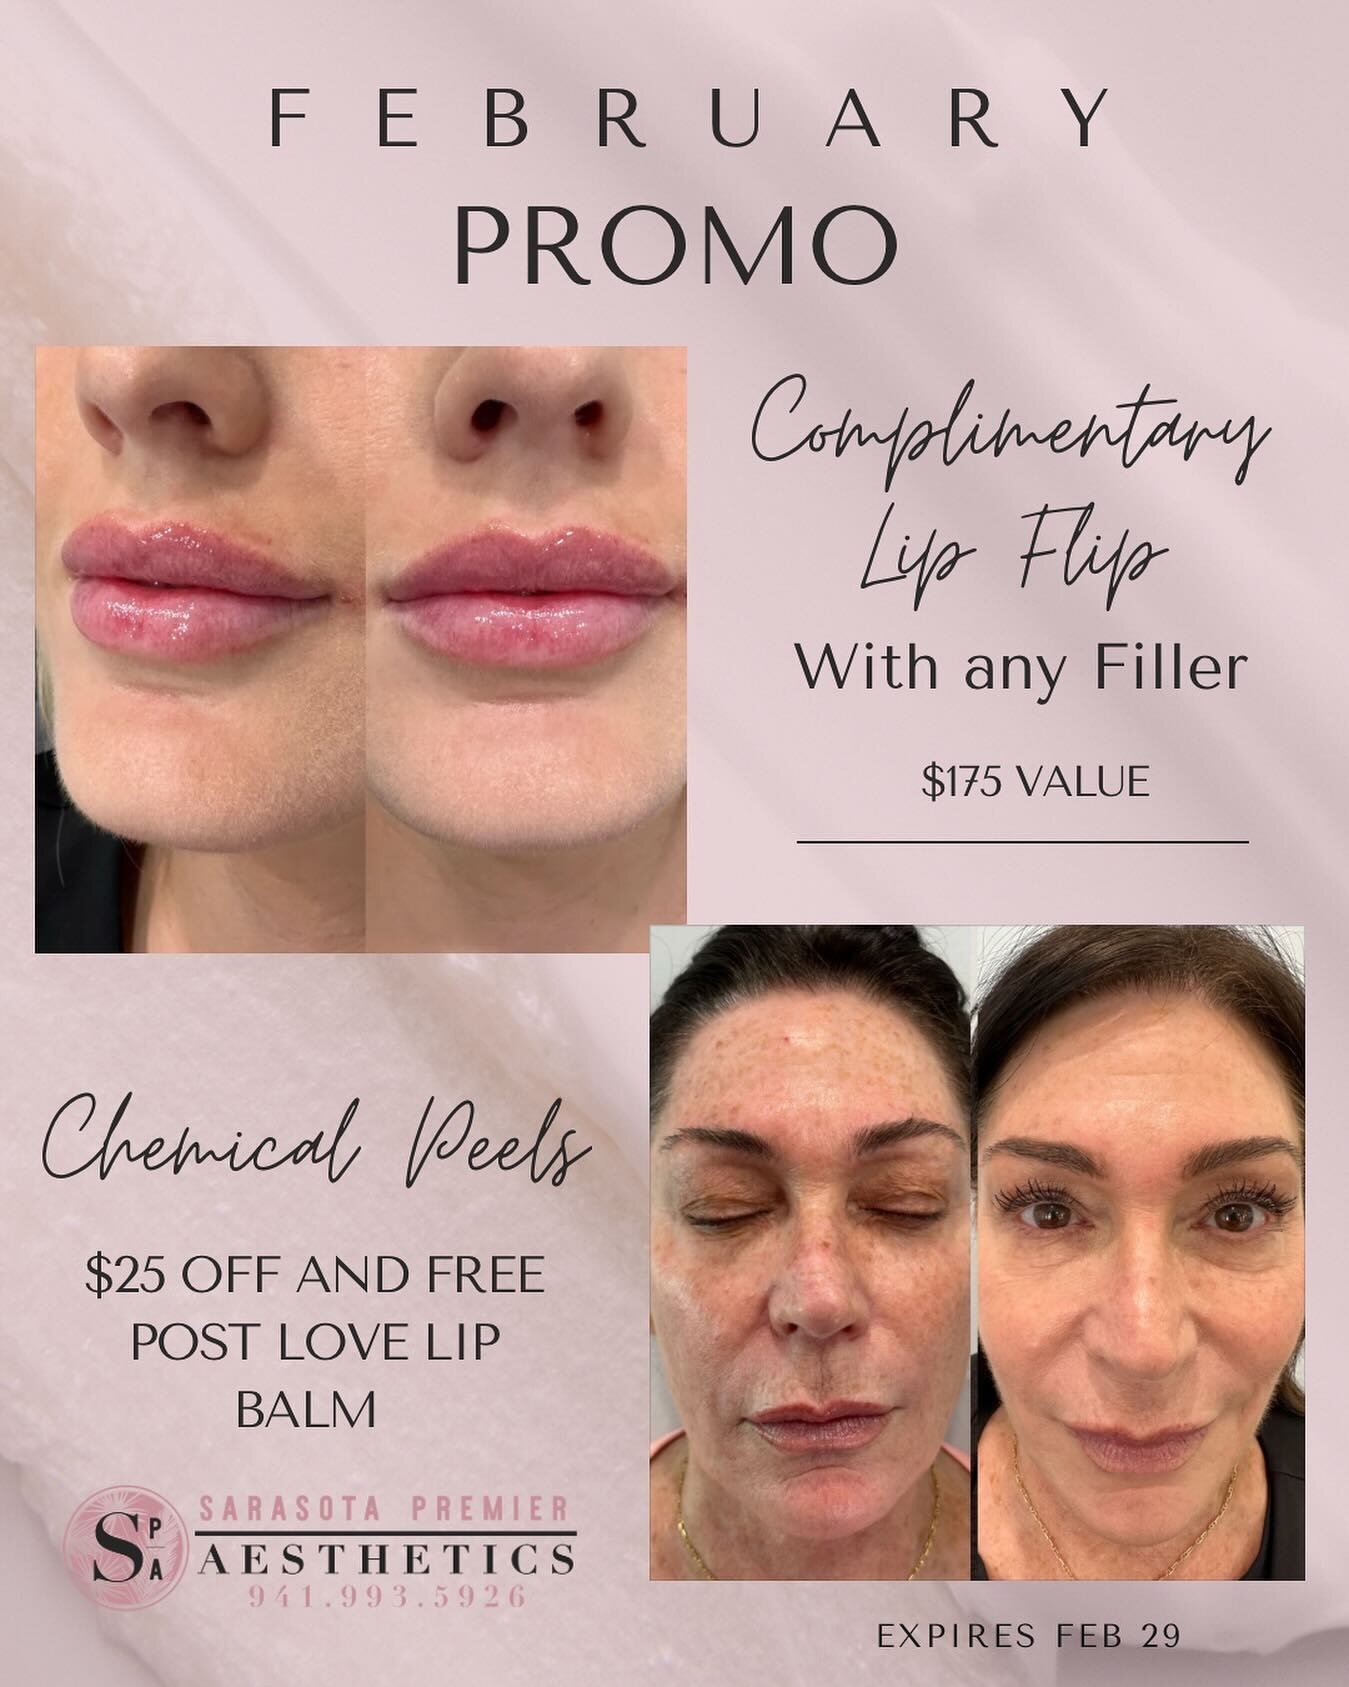 💋❤️Call today to take advantage of these February specials just in time for Valentine&rsquo;s Day💋❤️ Link in bio to book!

#botoxsarasota #botoxlakewoodranch
#lipfillerlakewoodranch #sarasotabotox
#lakewoodranchmedspa #lakewoodranchbotox #masterinj